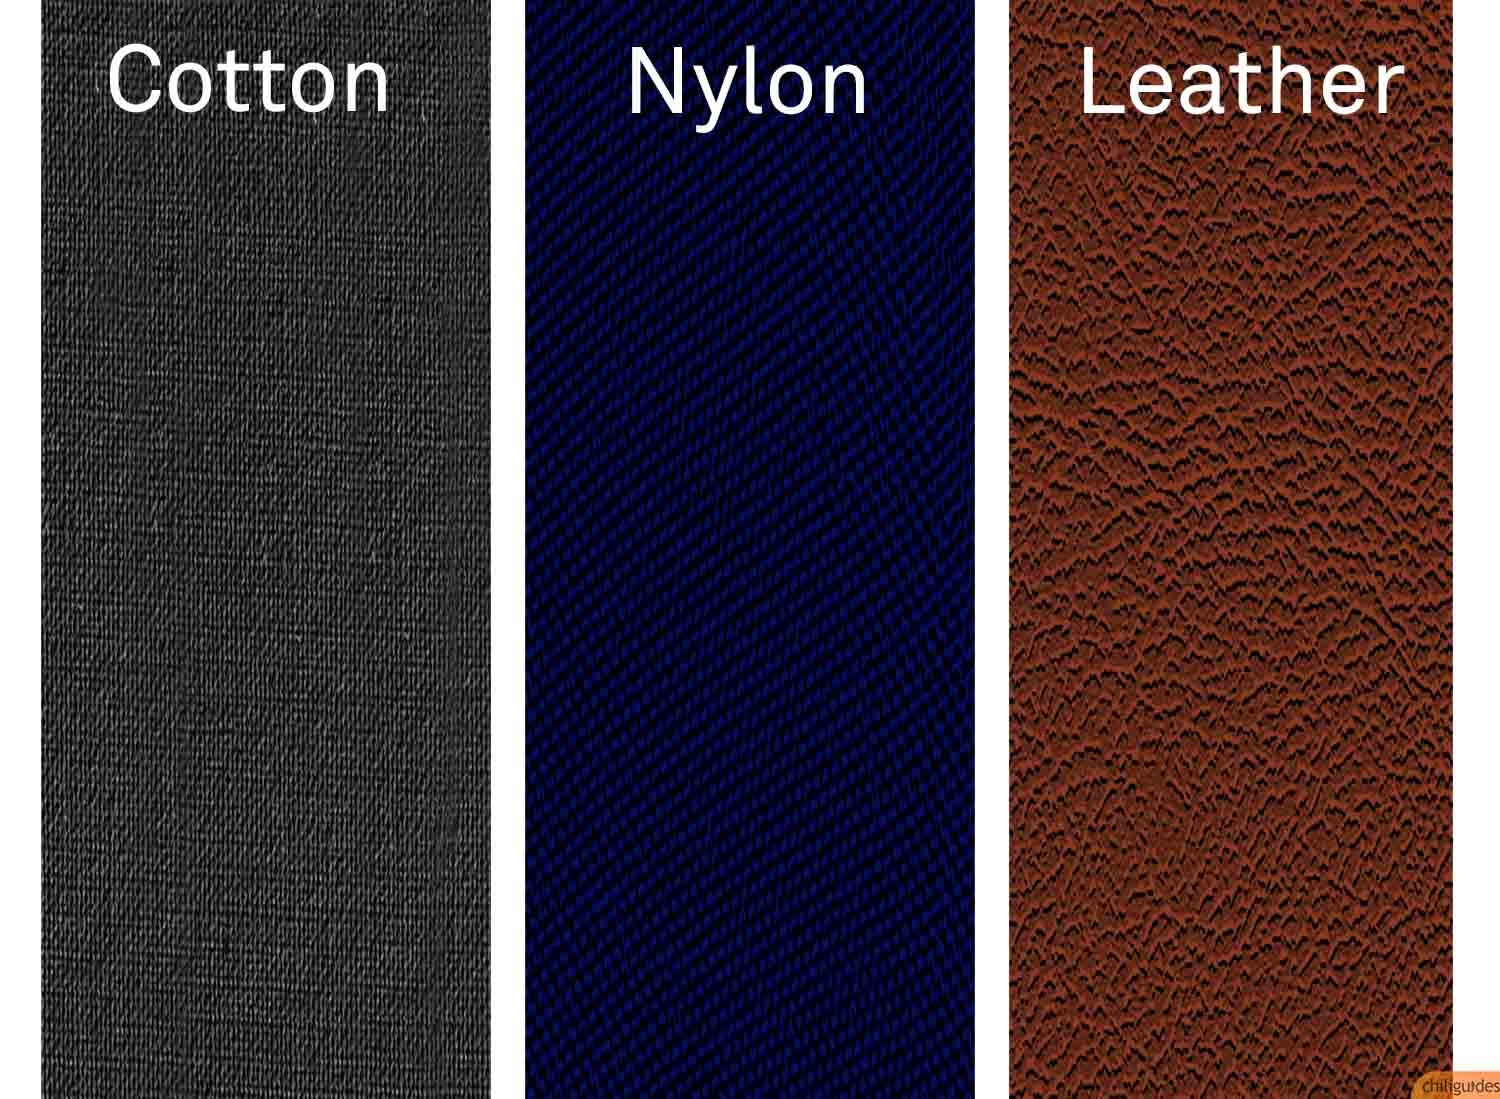 Choose cotton for comfort, nylon for quick release, and leather for stability.